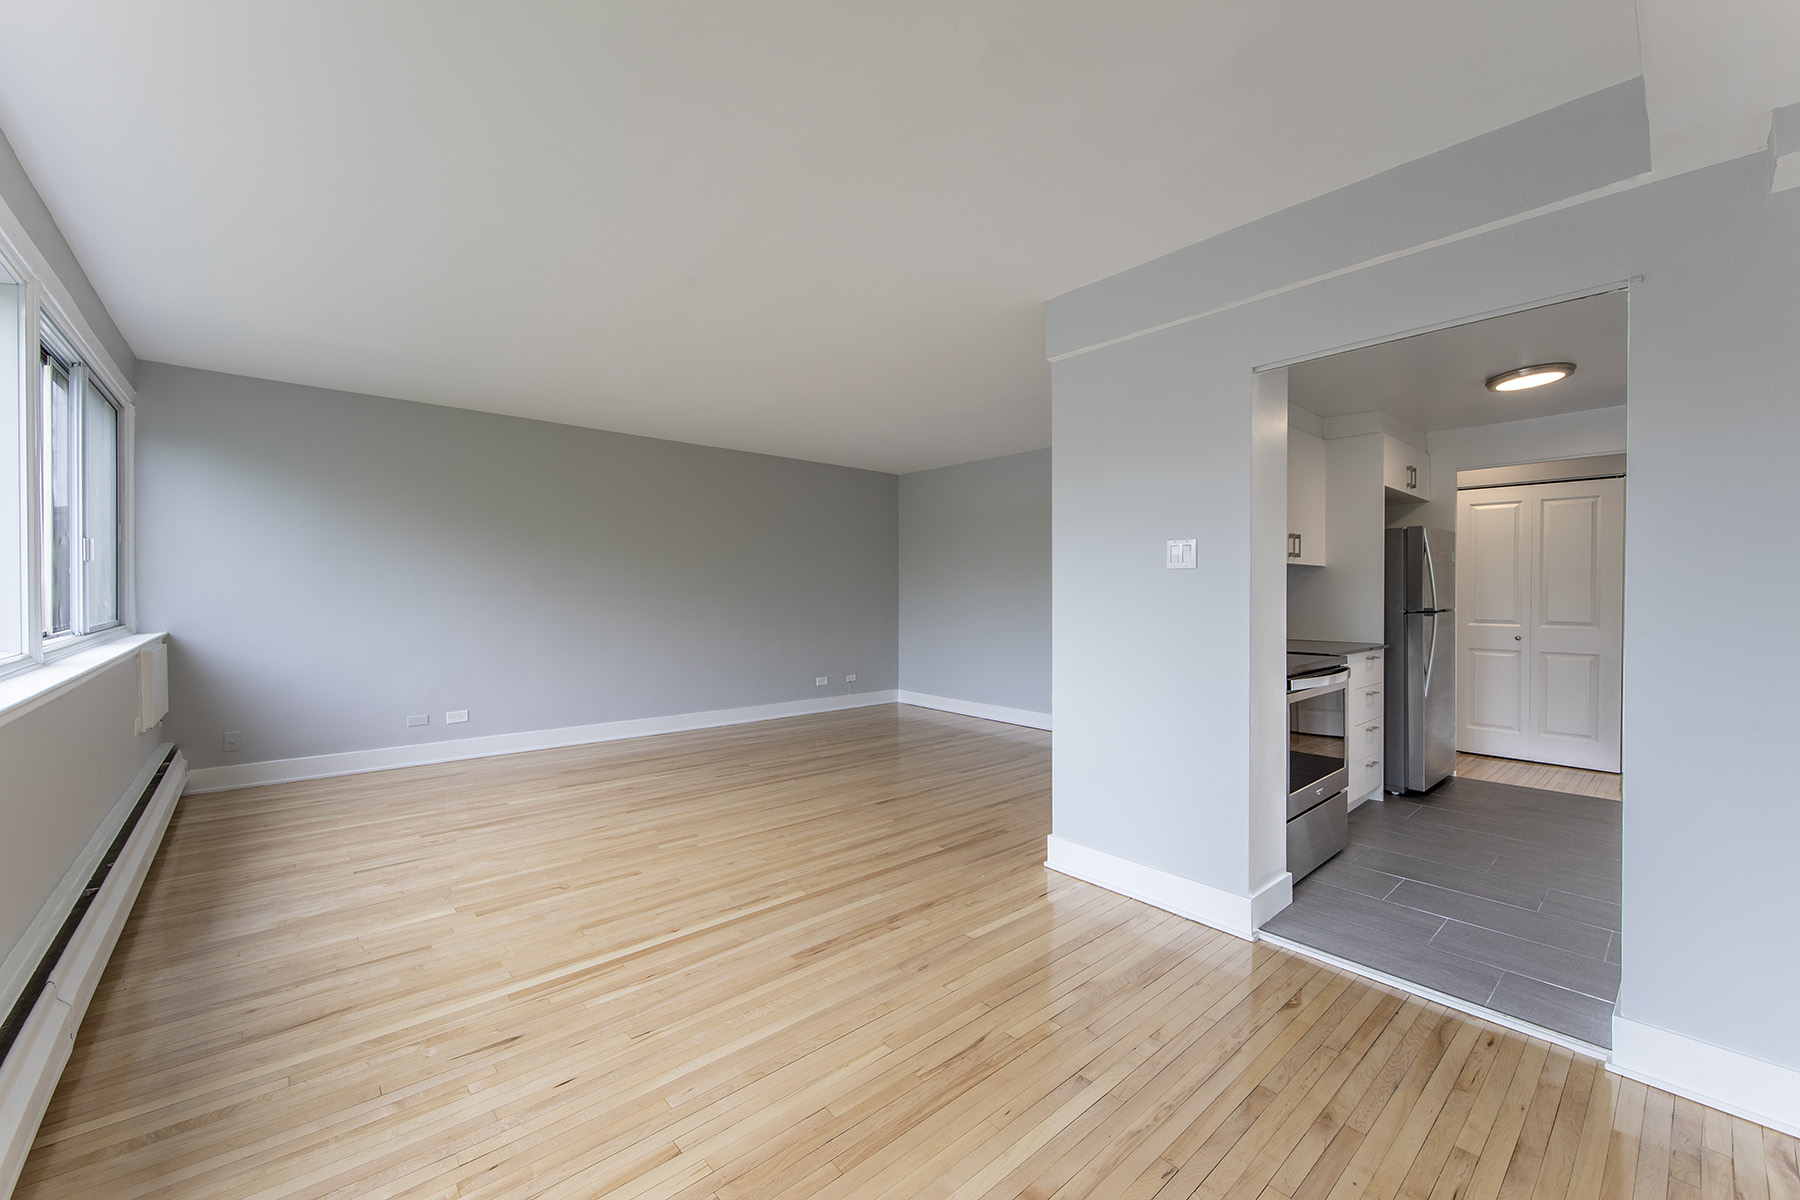 2 bedroom Apartments for rent in Cote-St-Luc at 5765 Cote St-Luc - Photo 02 - RentersPages – L401533